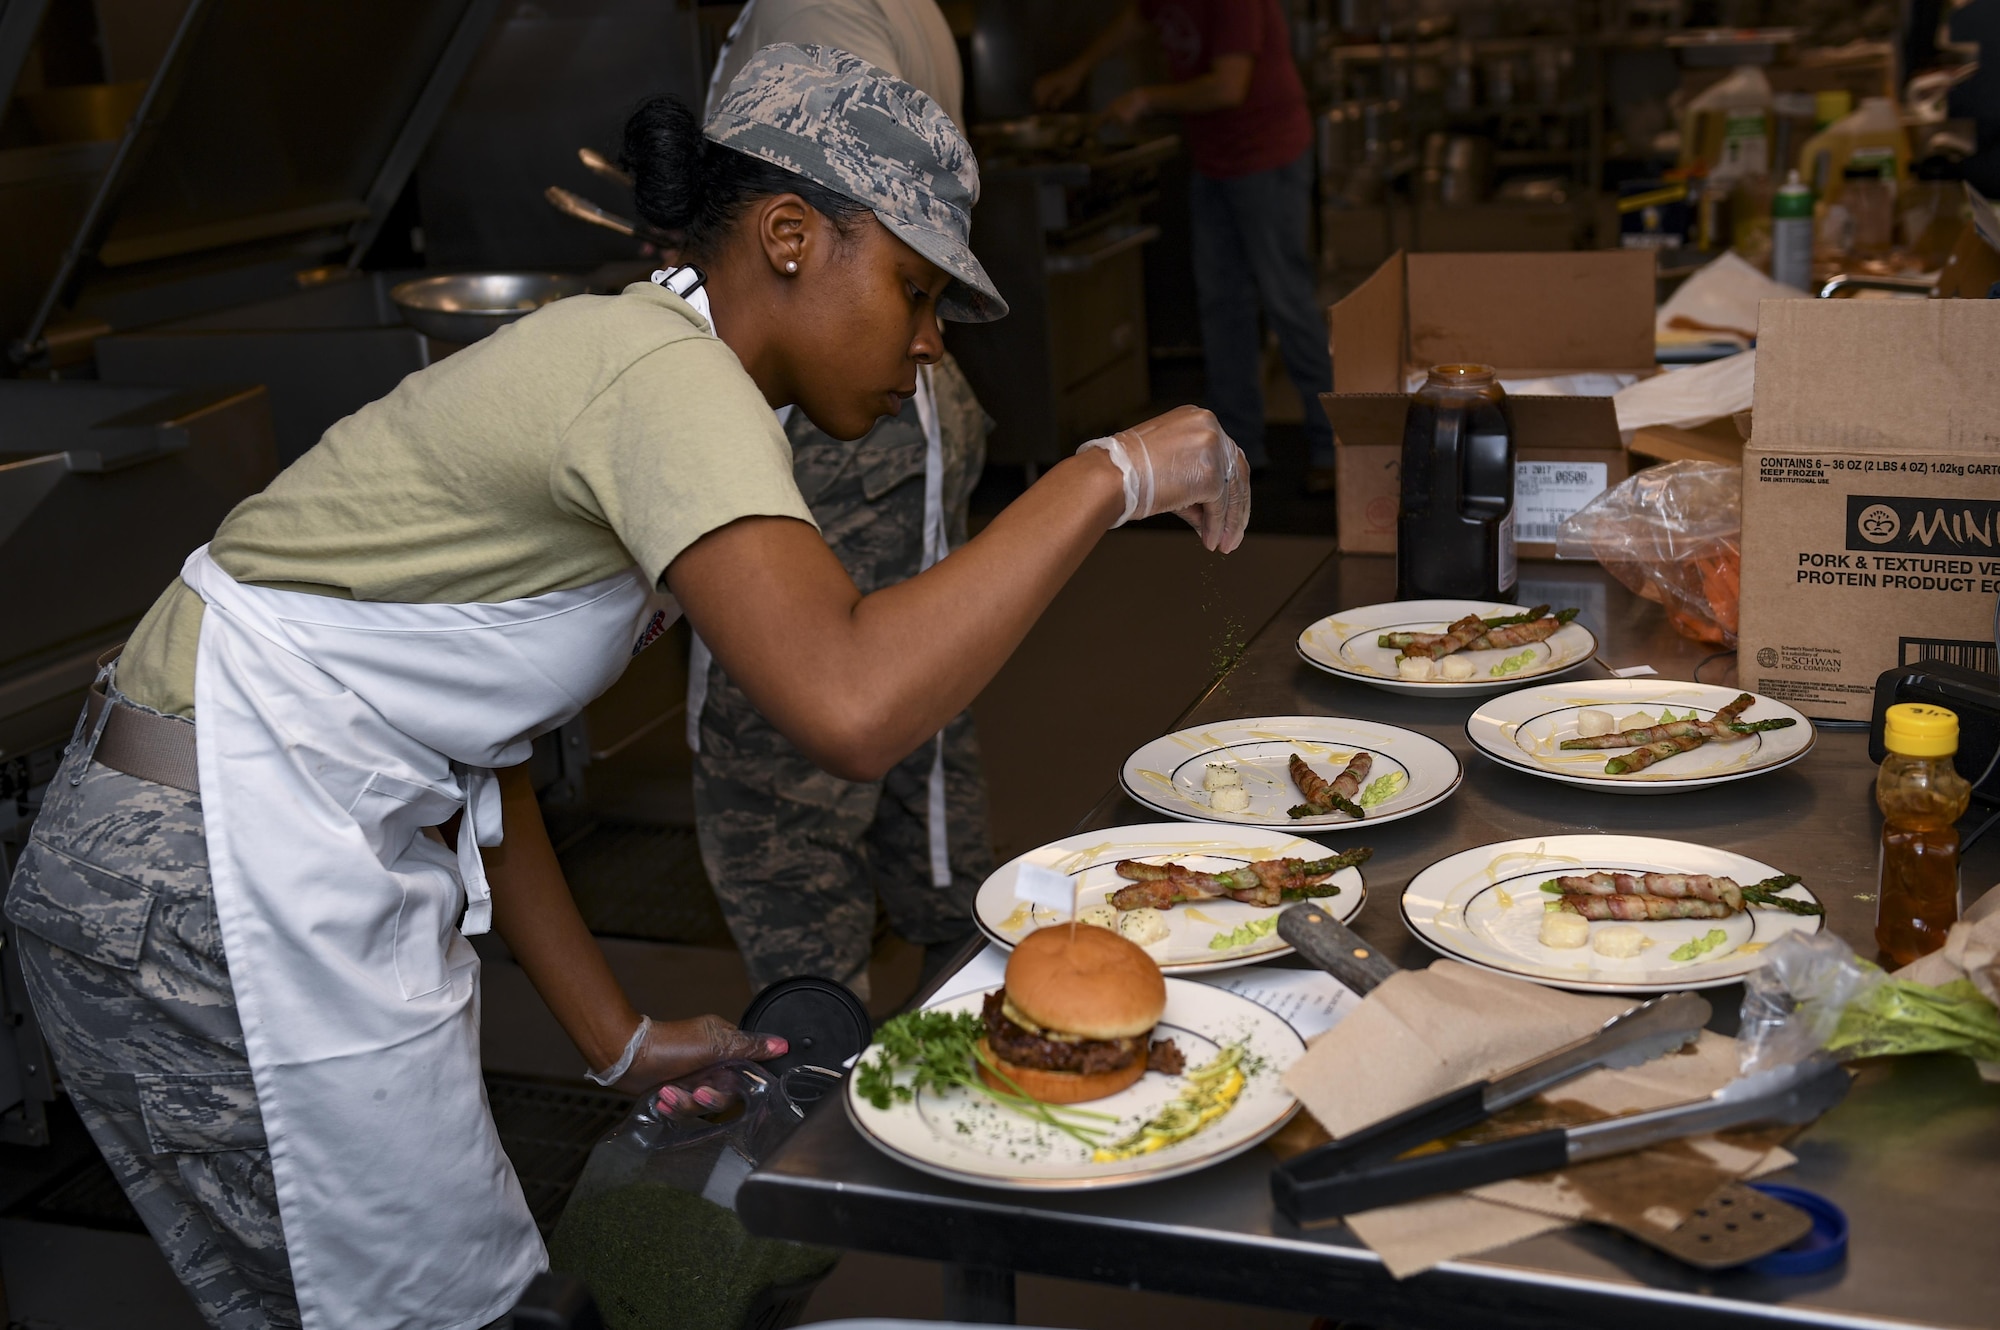 Senior Airman Shakilah Bates, 23d Force Support Squadron food service specialist, adds the finishing touches to her dishes moments before the conclusion of the first Iron Chef Competition held at the Georgia Pines Dinning Facility, March 23, 2017, at Moody Air Force Base, Ga. Four teams were given an hour to prepare their meals for the judges. The 23d Force Support Squadron plans to hold at least one Iron Chef Competition per year. (U.S. Air Force photo by Airman 1st Class Daniel Snider)